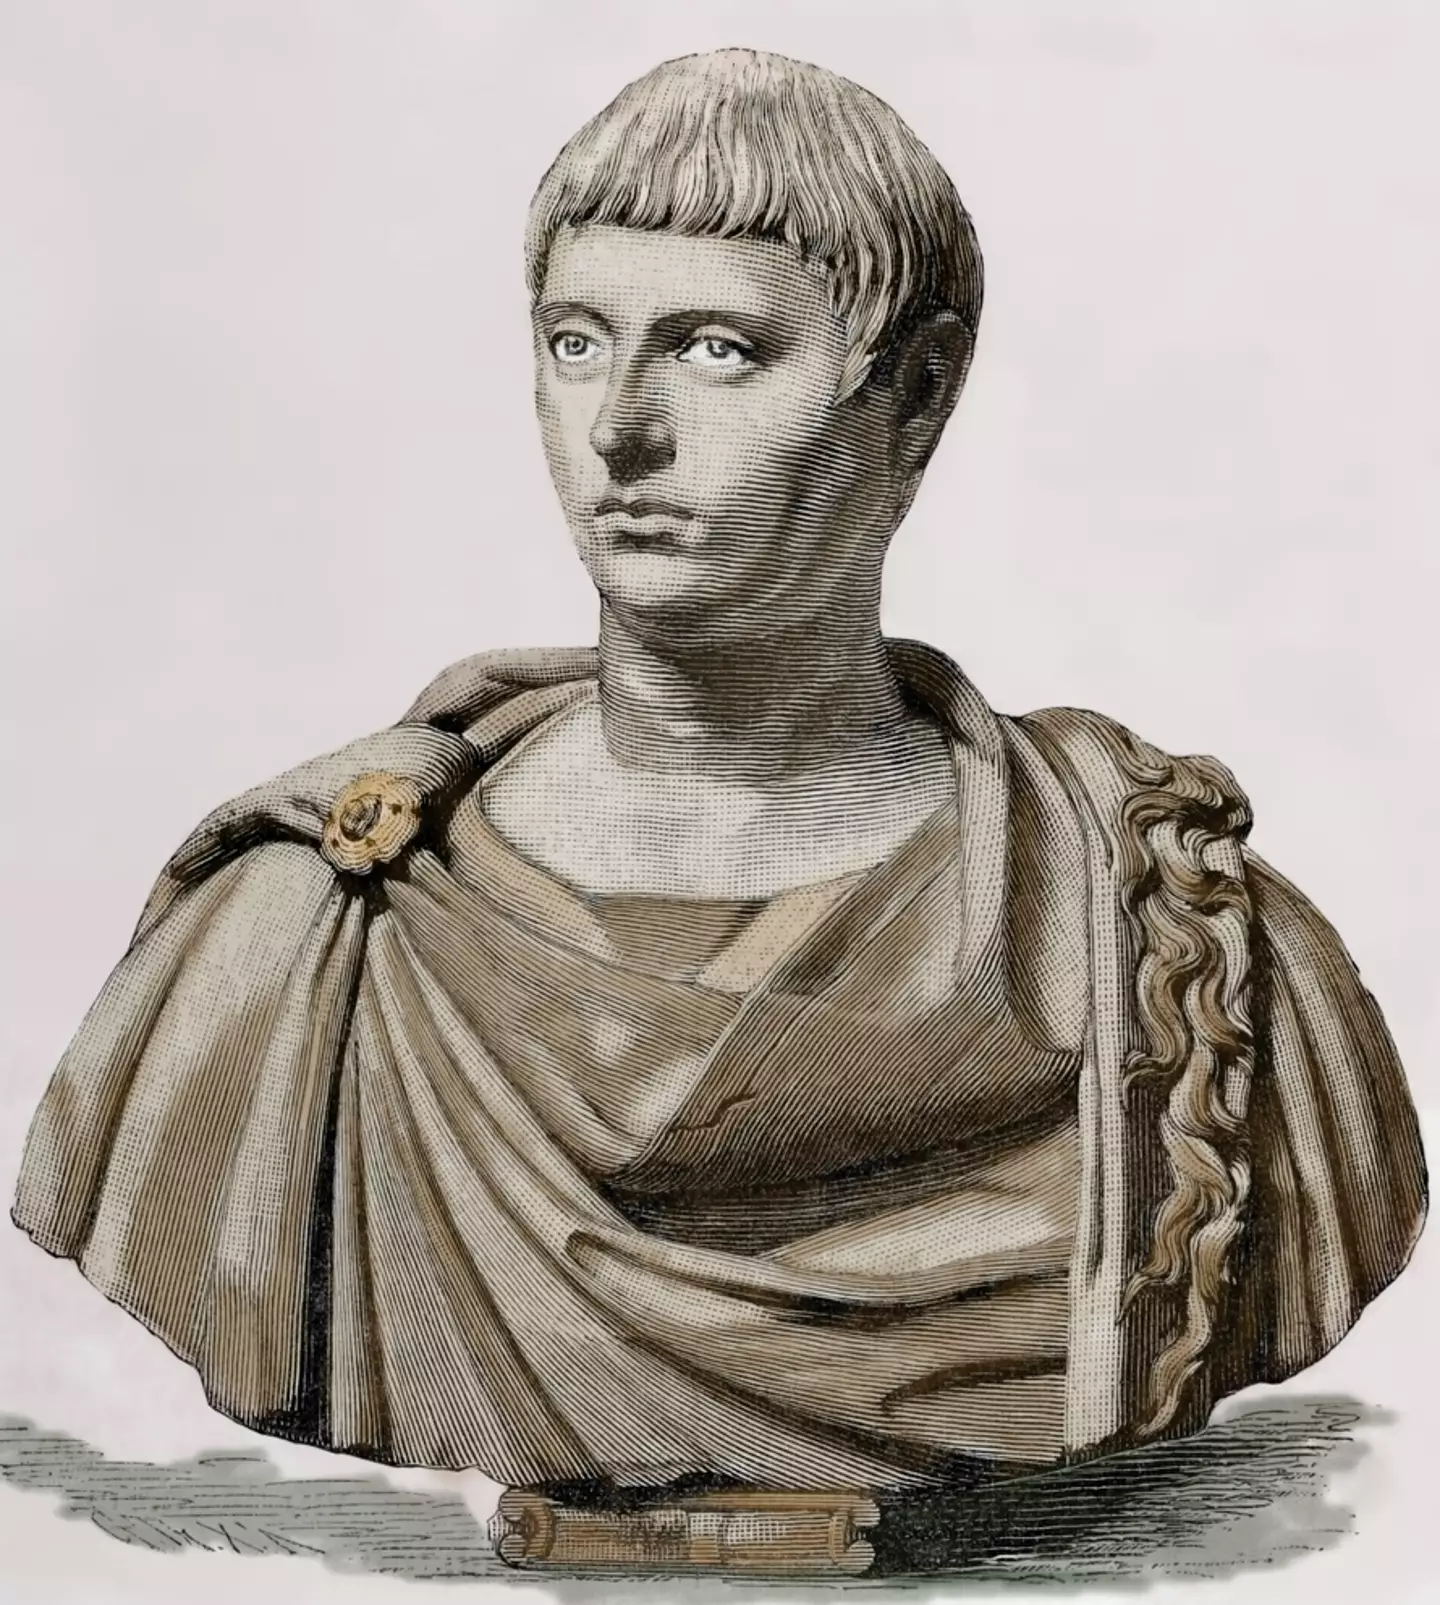 The Roman Emperor will now be referred to as a trans woman.